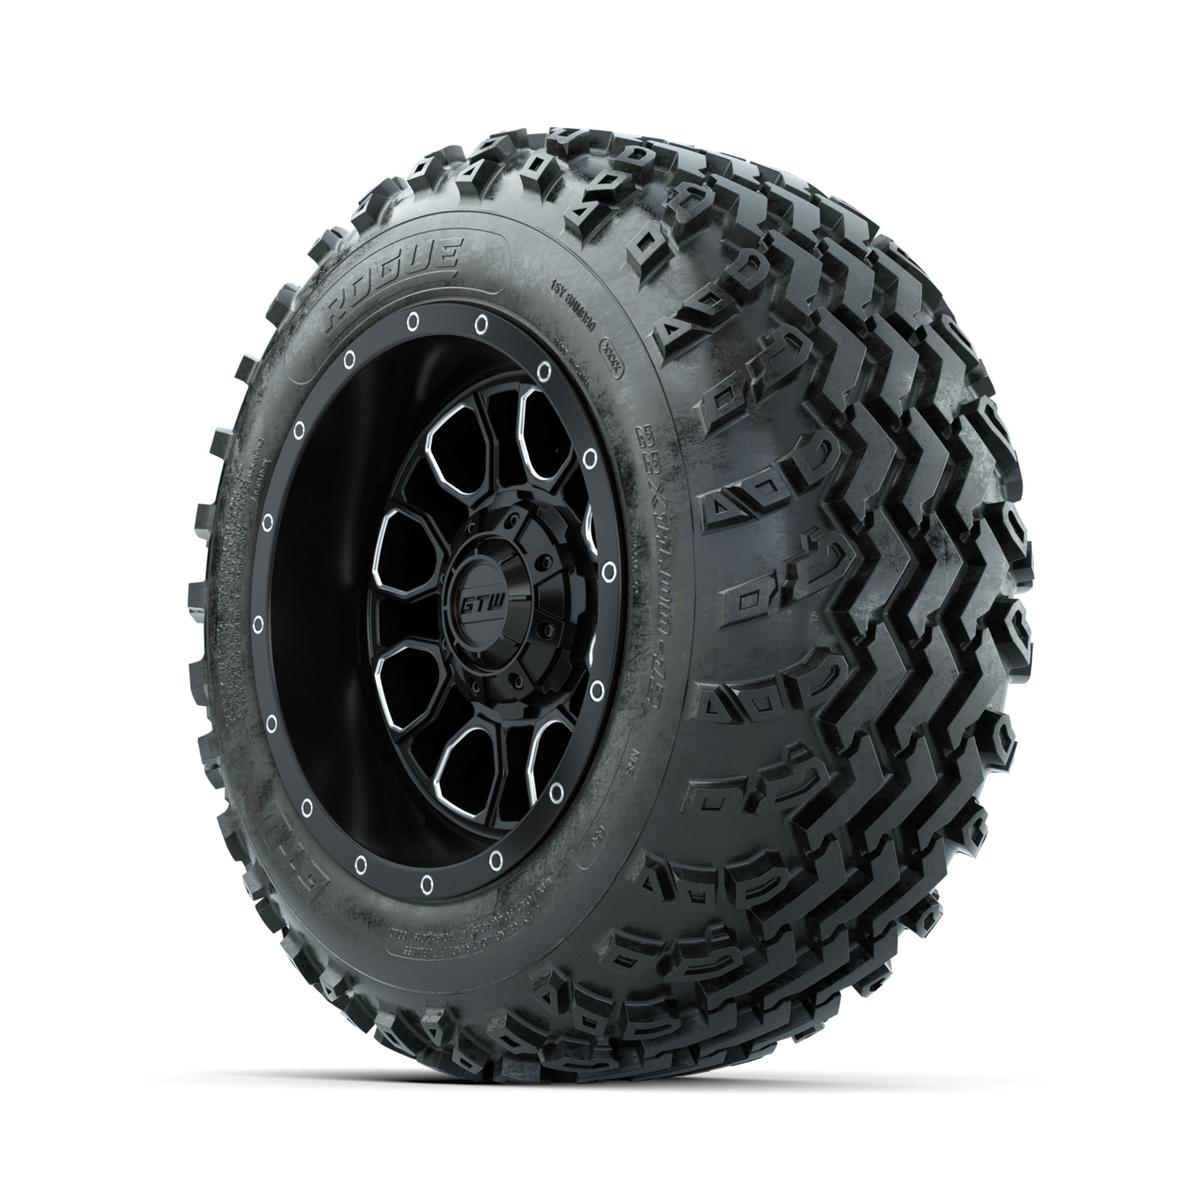 GTW Volt Machined/Black 12 in Wheels with 22x11.00-12 Rogue All Terrain Tires – Full Set